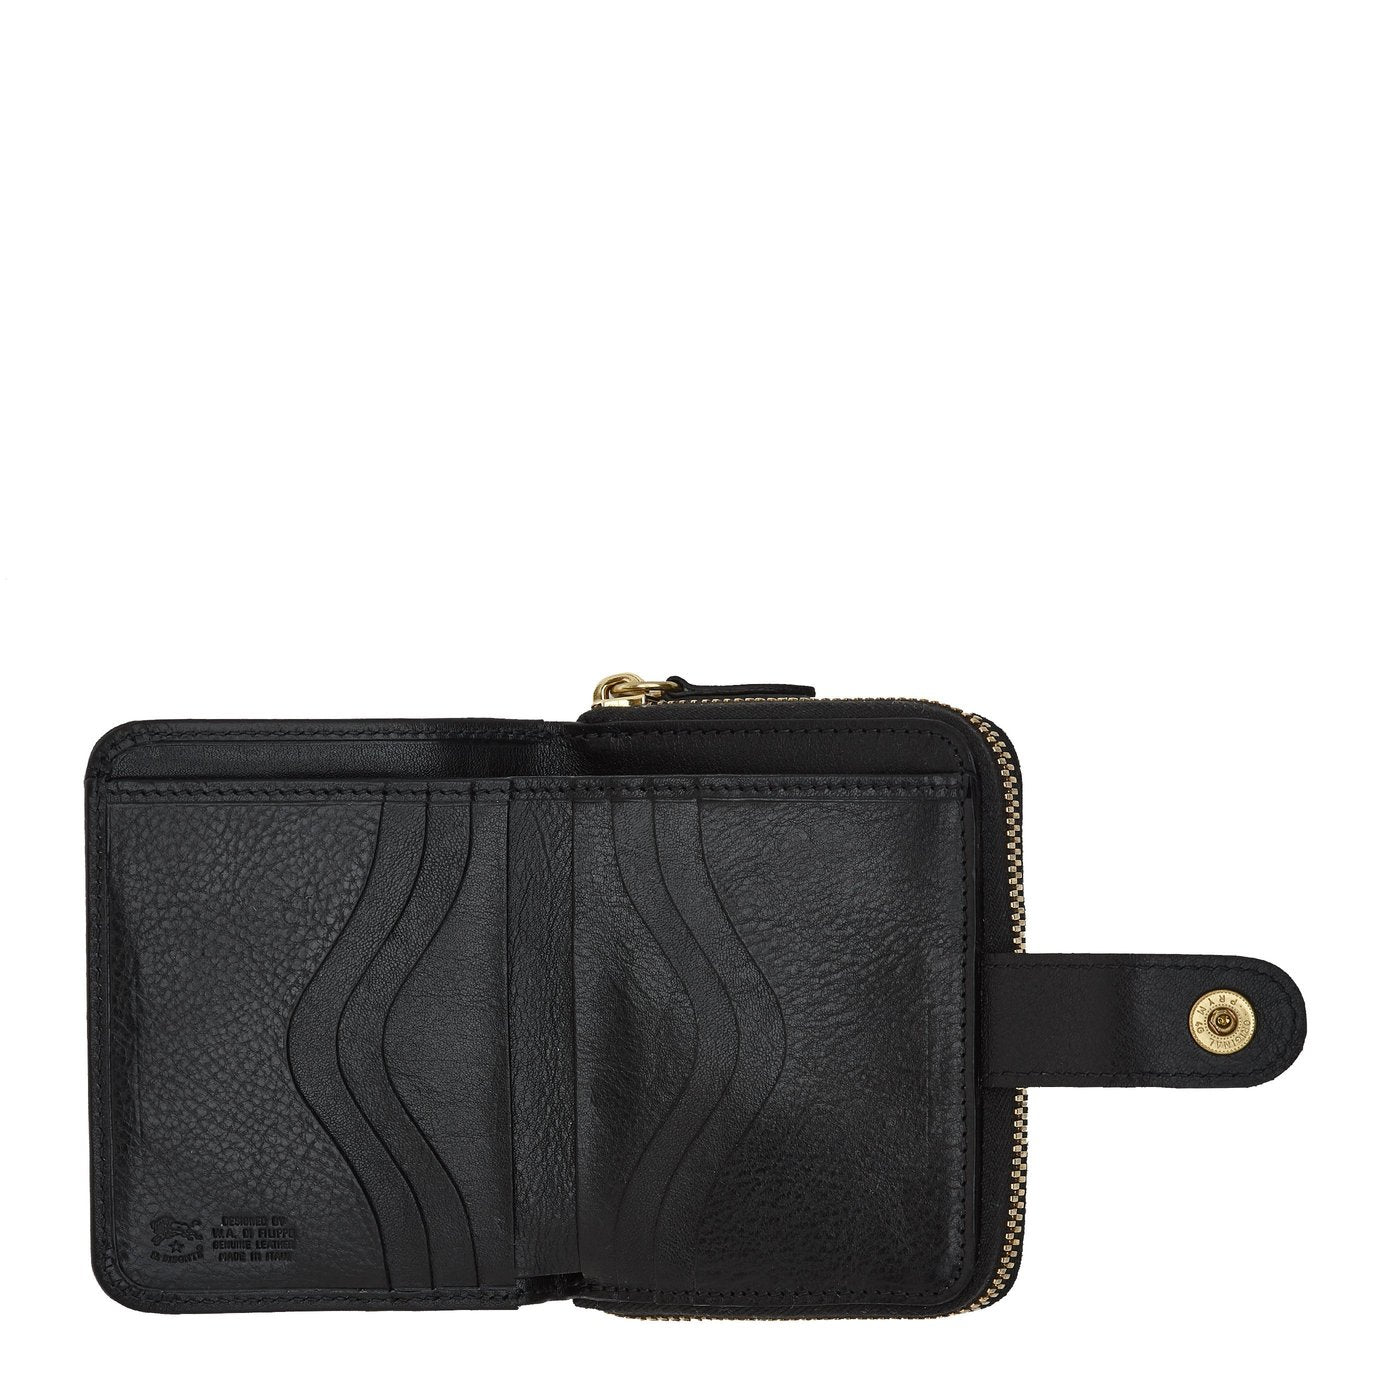 Women's Wallet in Calf Leather color Black